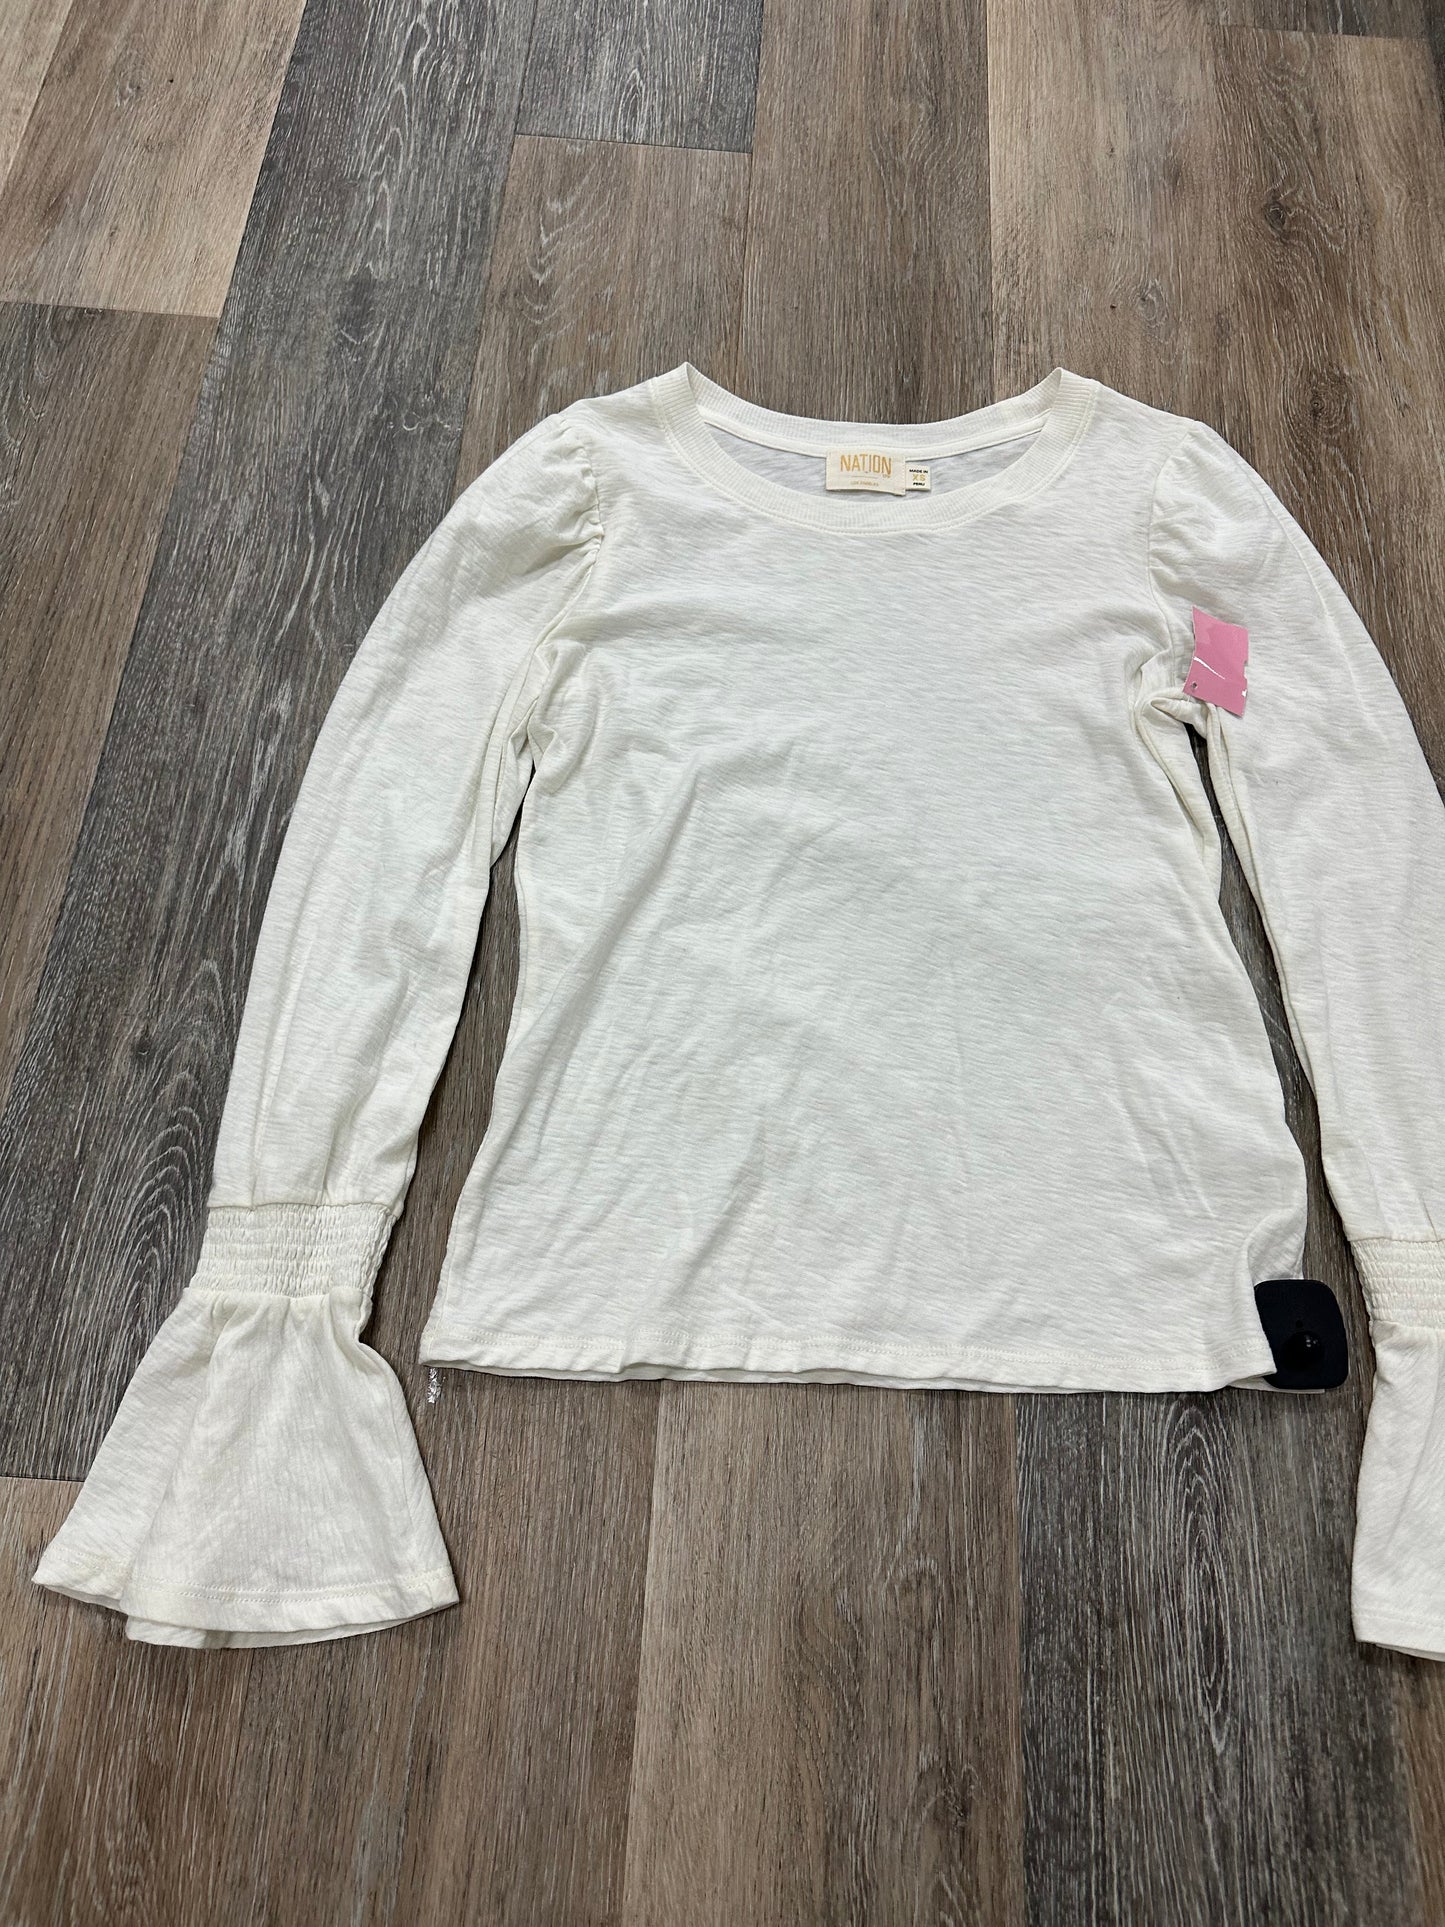 Top Long Sleeve By Nation LTD  Size: Xs